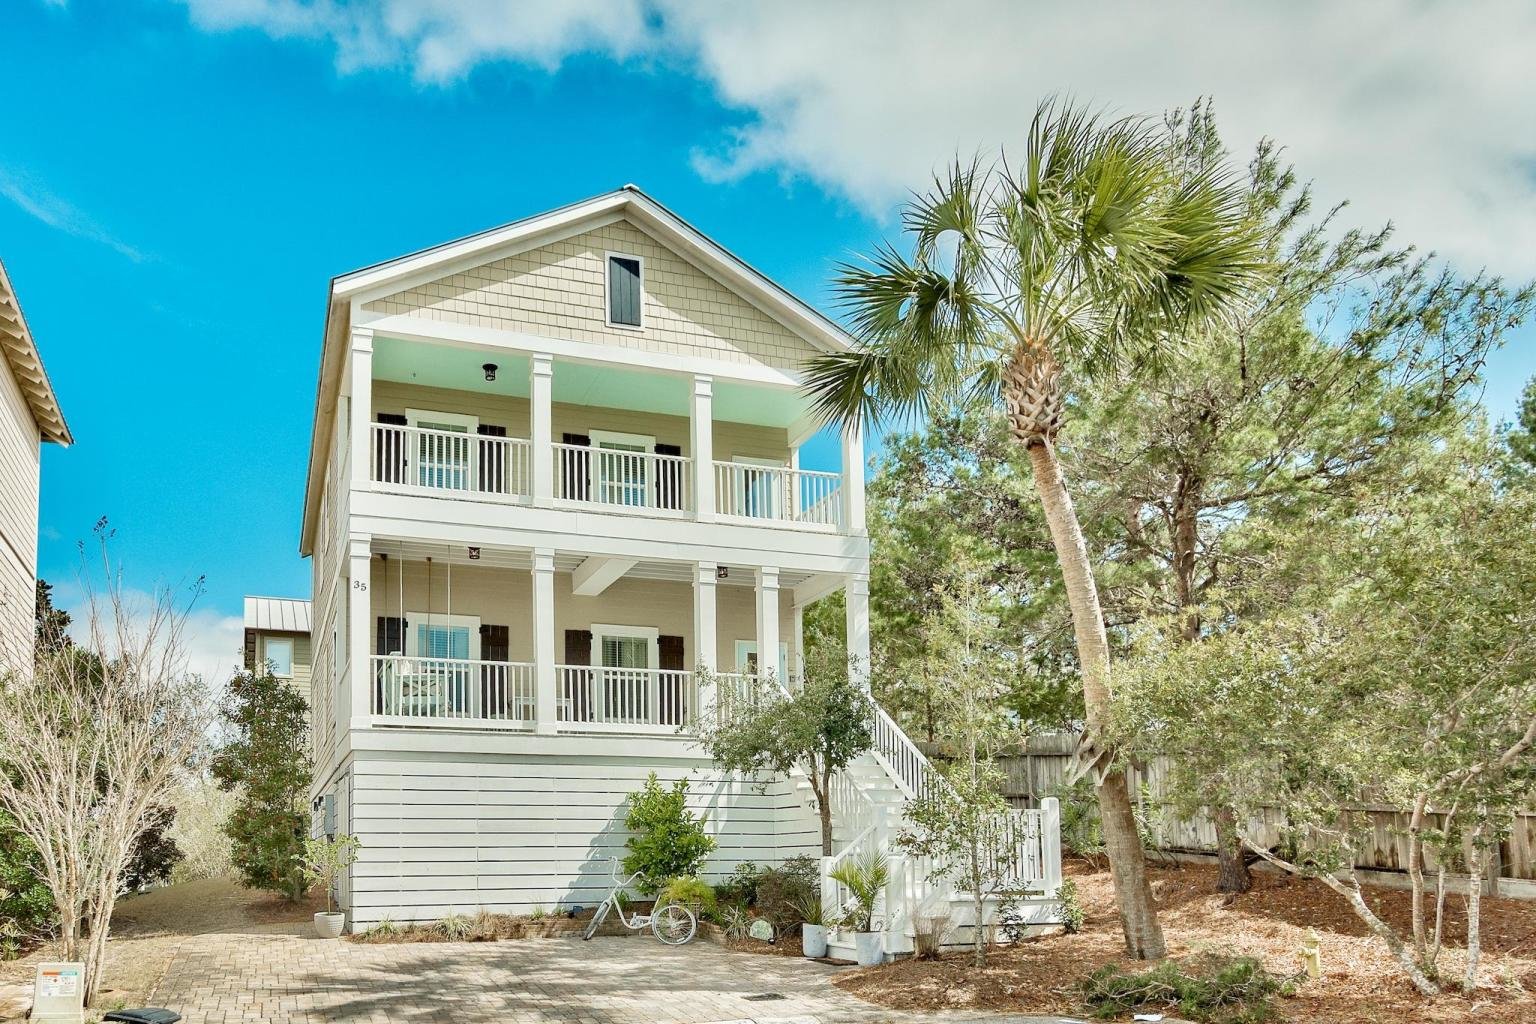 Home in Village at Blue Mountain Beach - just reduced